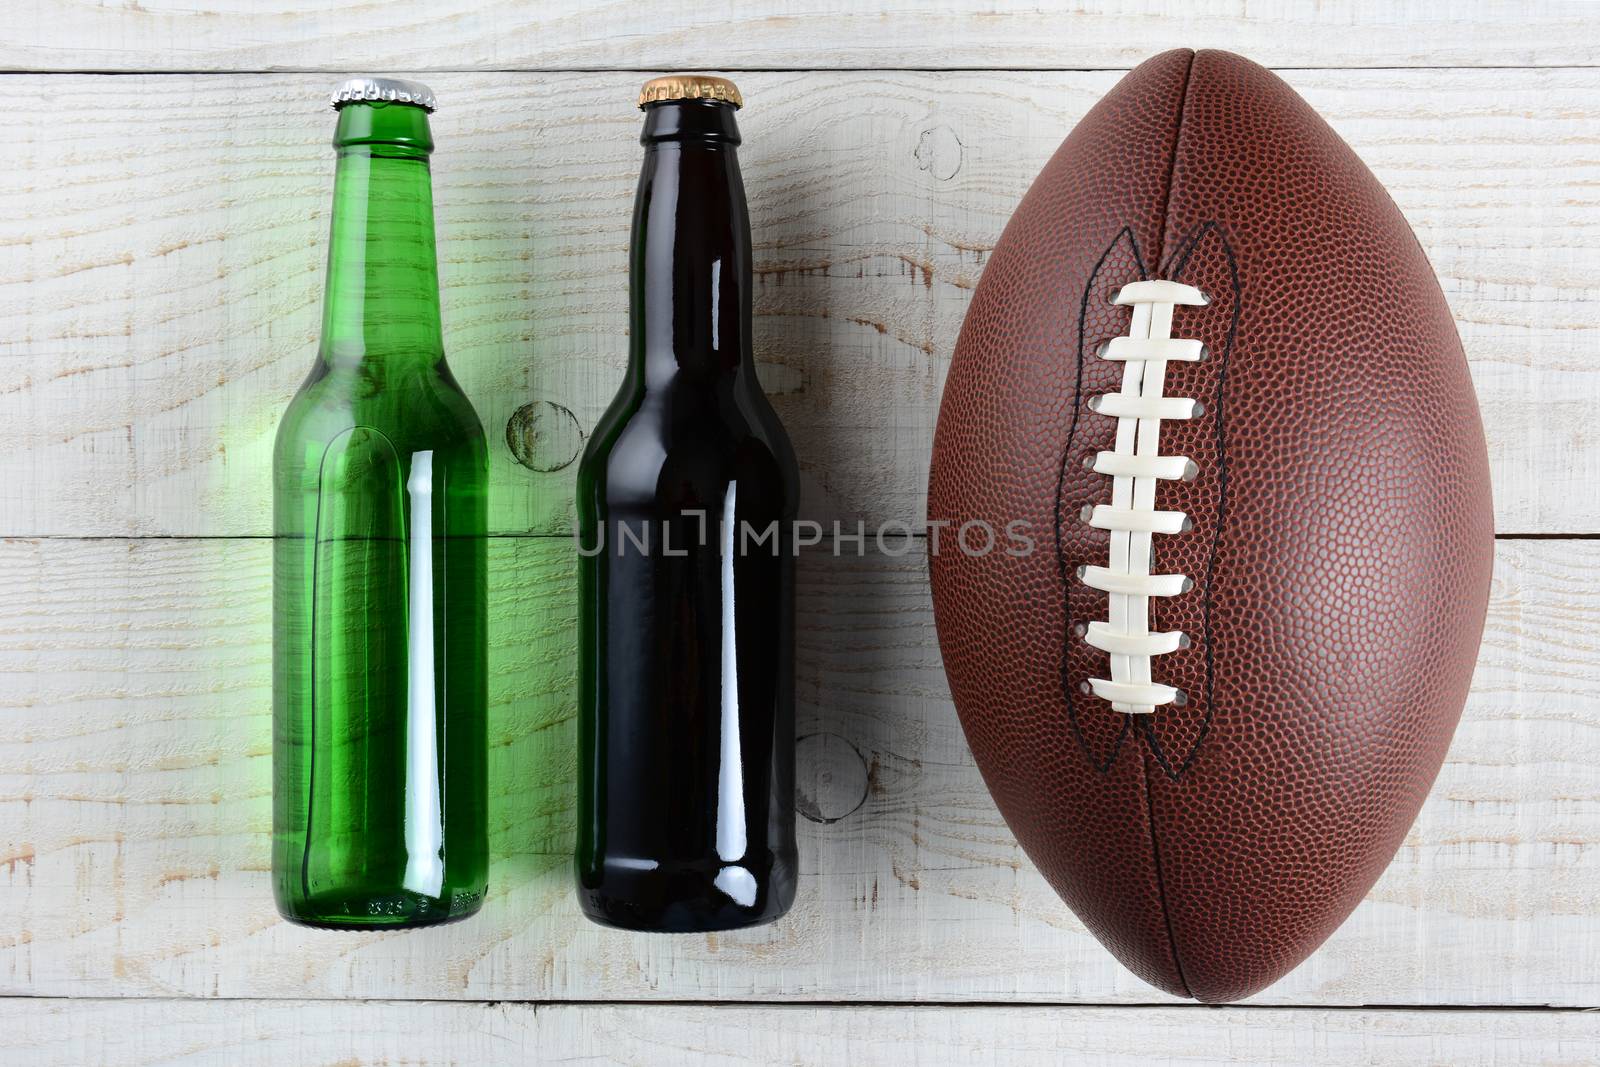 Beer and Football by sCukrov